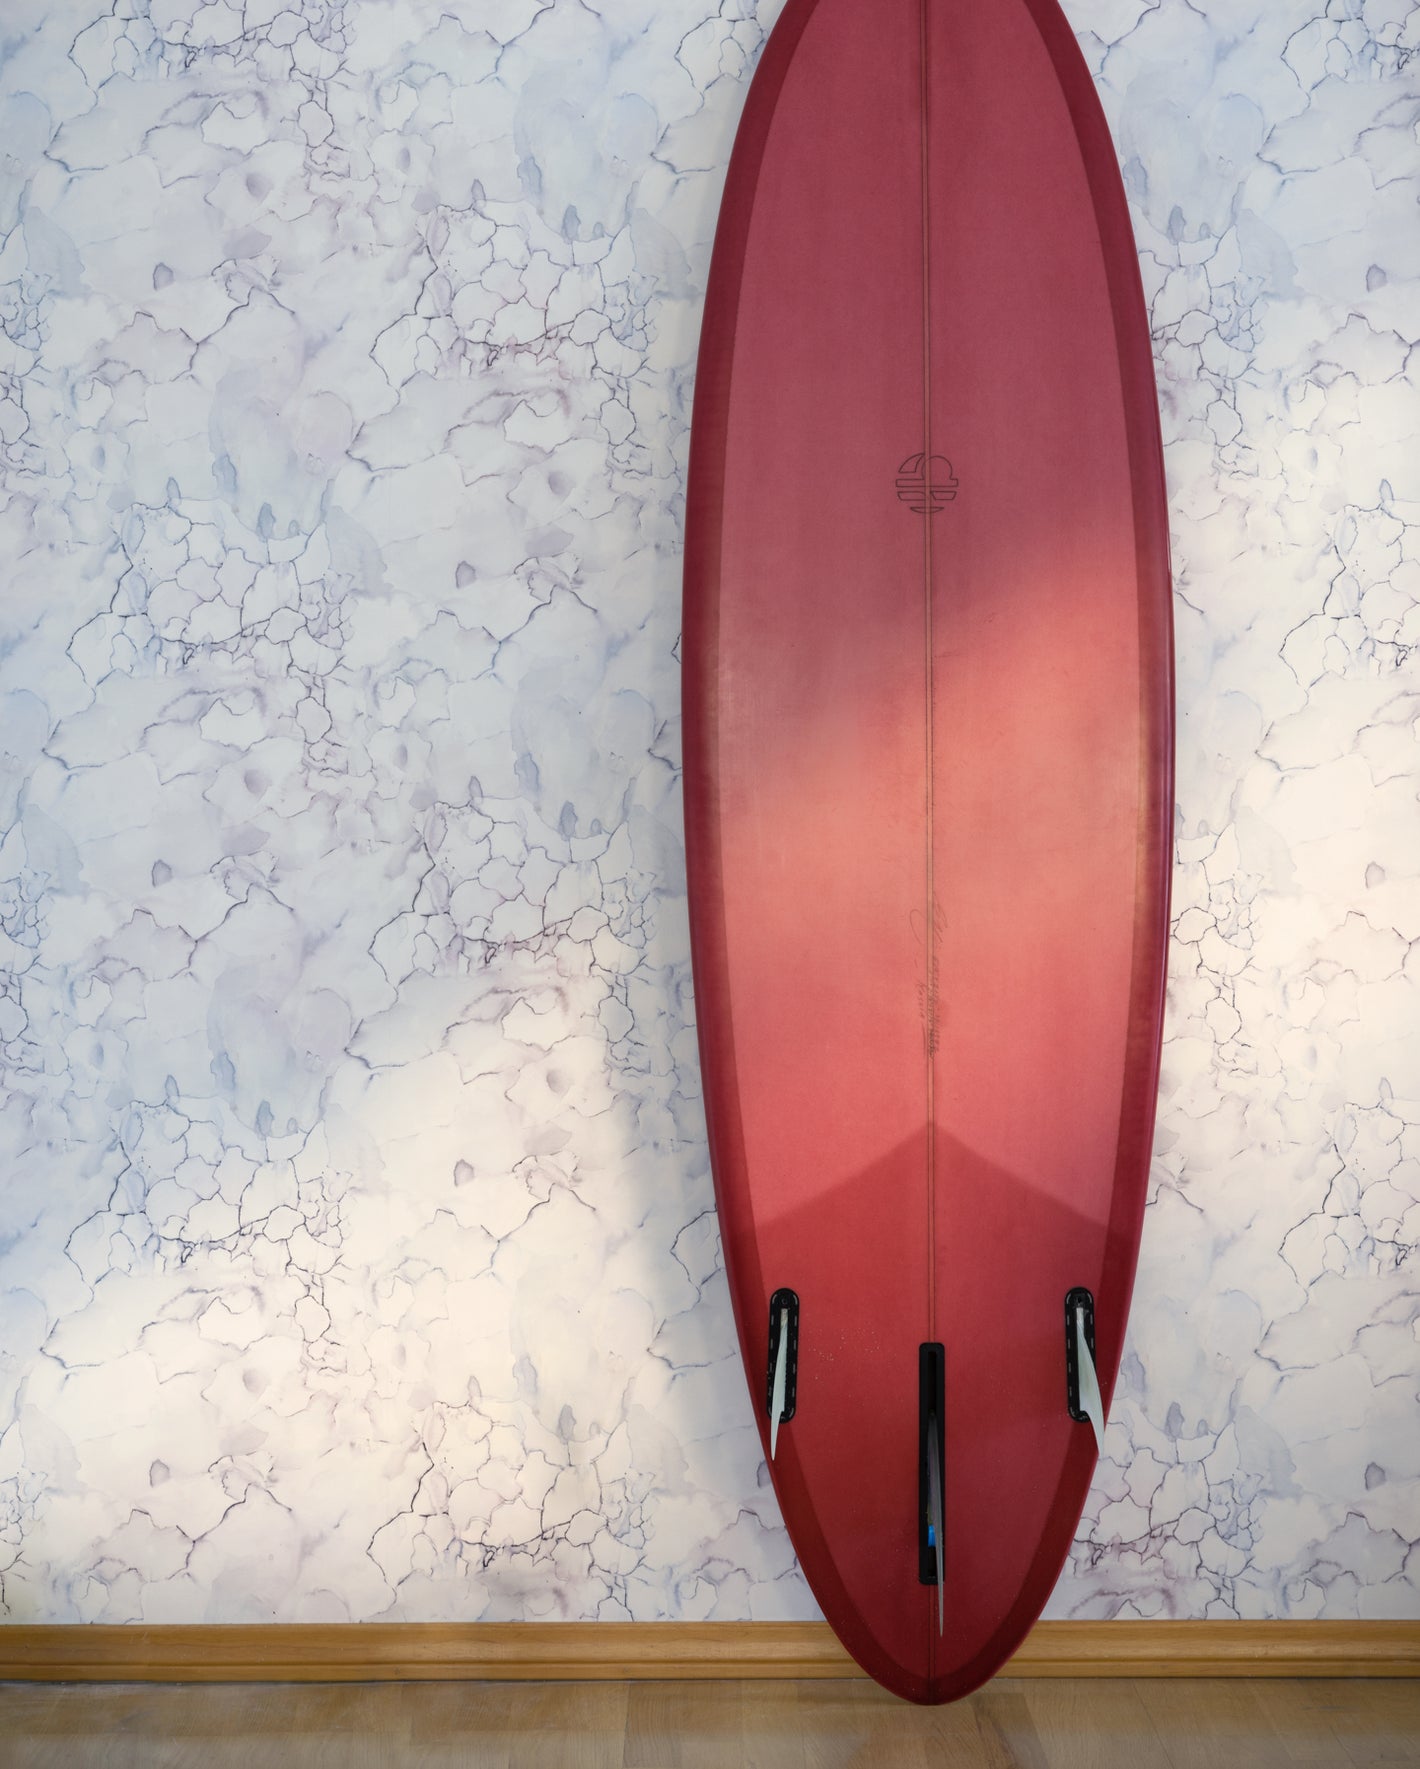 A red surfboard leans against a wall